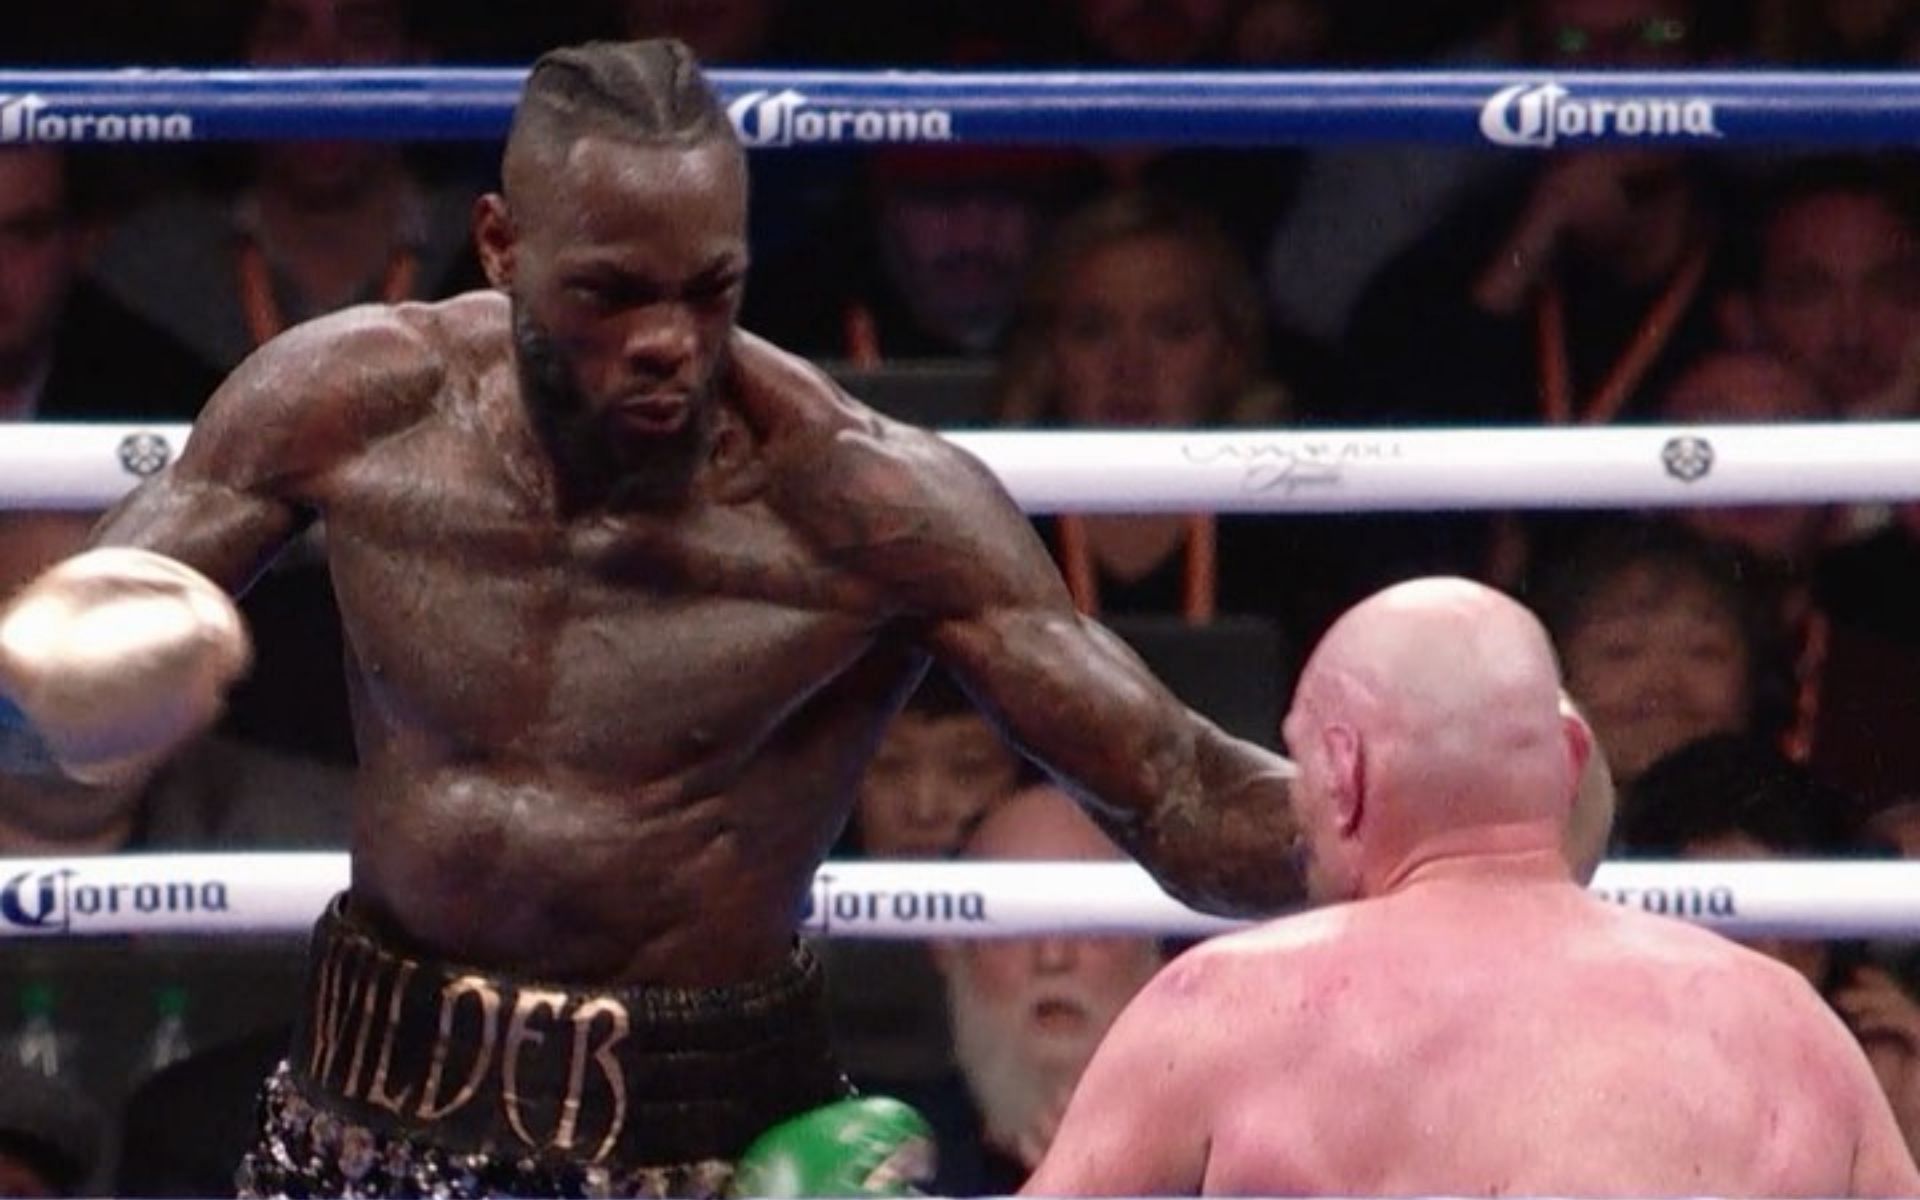 Is Deontay Wilder the hardest hitting fighter in combat sports? [Image Credit: @bronzebomber on Instagram]